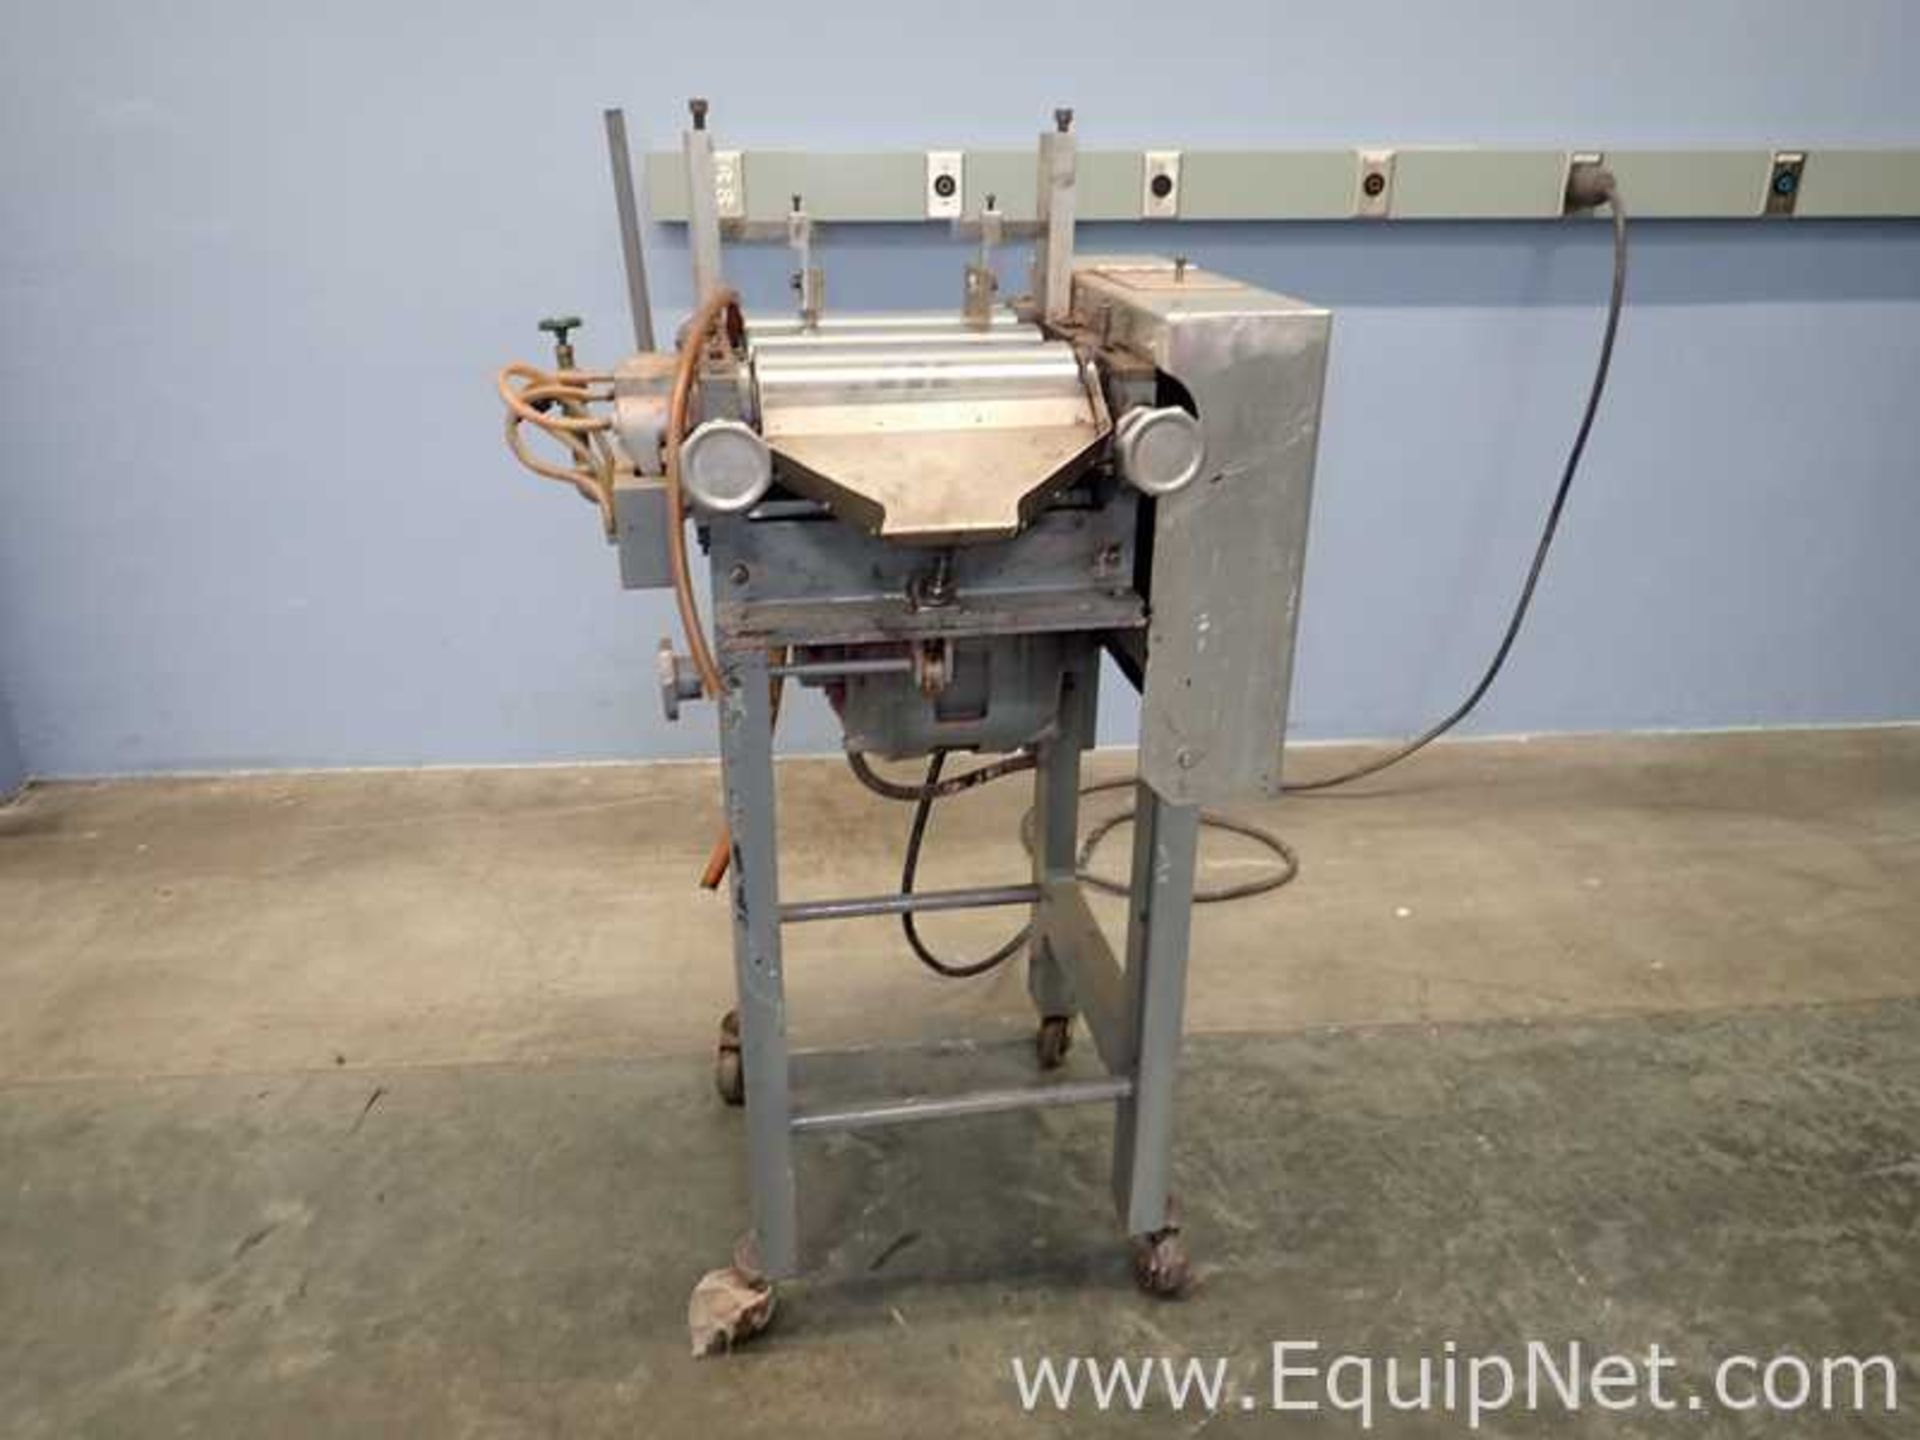 DESCRIPTION: This three roll mill is appx 12" in length EQUIPNET LISTING # 720238 HANDLING FEE: $ - Image 10 of 19